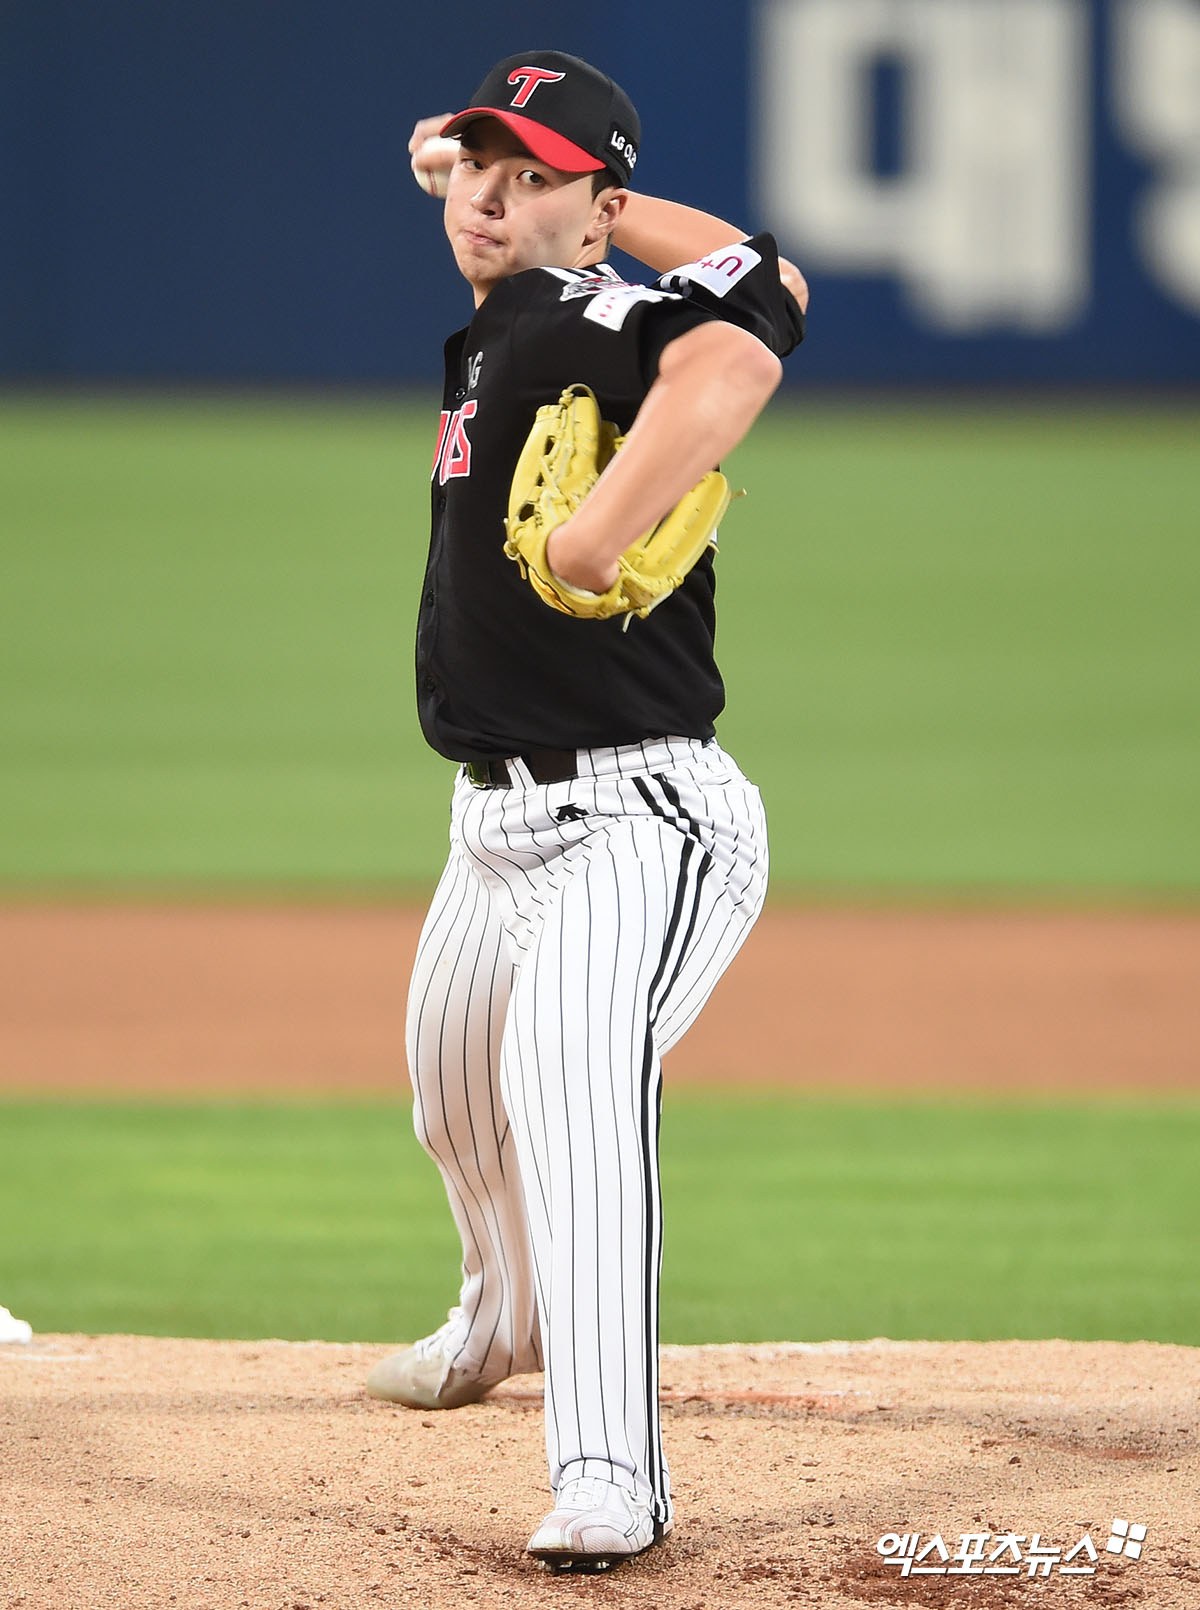 LG Twins and Samsung Lions Lions game of the 2020 Shinhan Bank SOL KBO League held at Deagu Samsung Lions Lions Park on the afternoon of the 26th, and LG starter Lee Min-ho is throwing the ball vigorously at the end of the first inning.